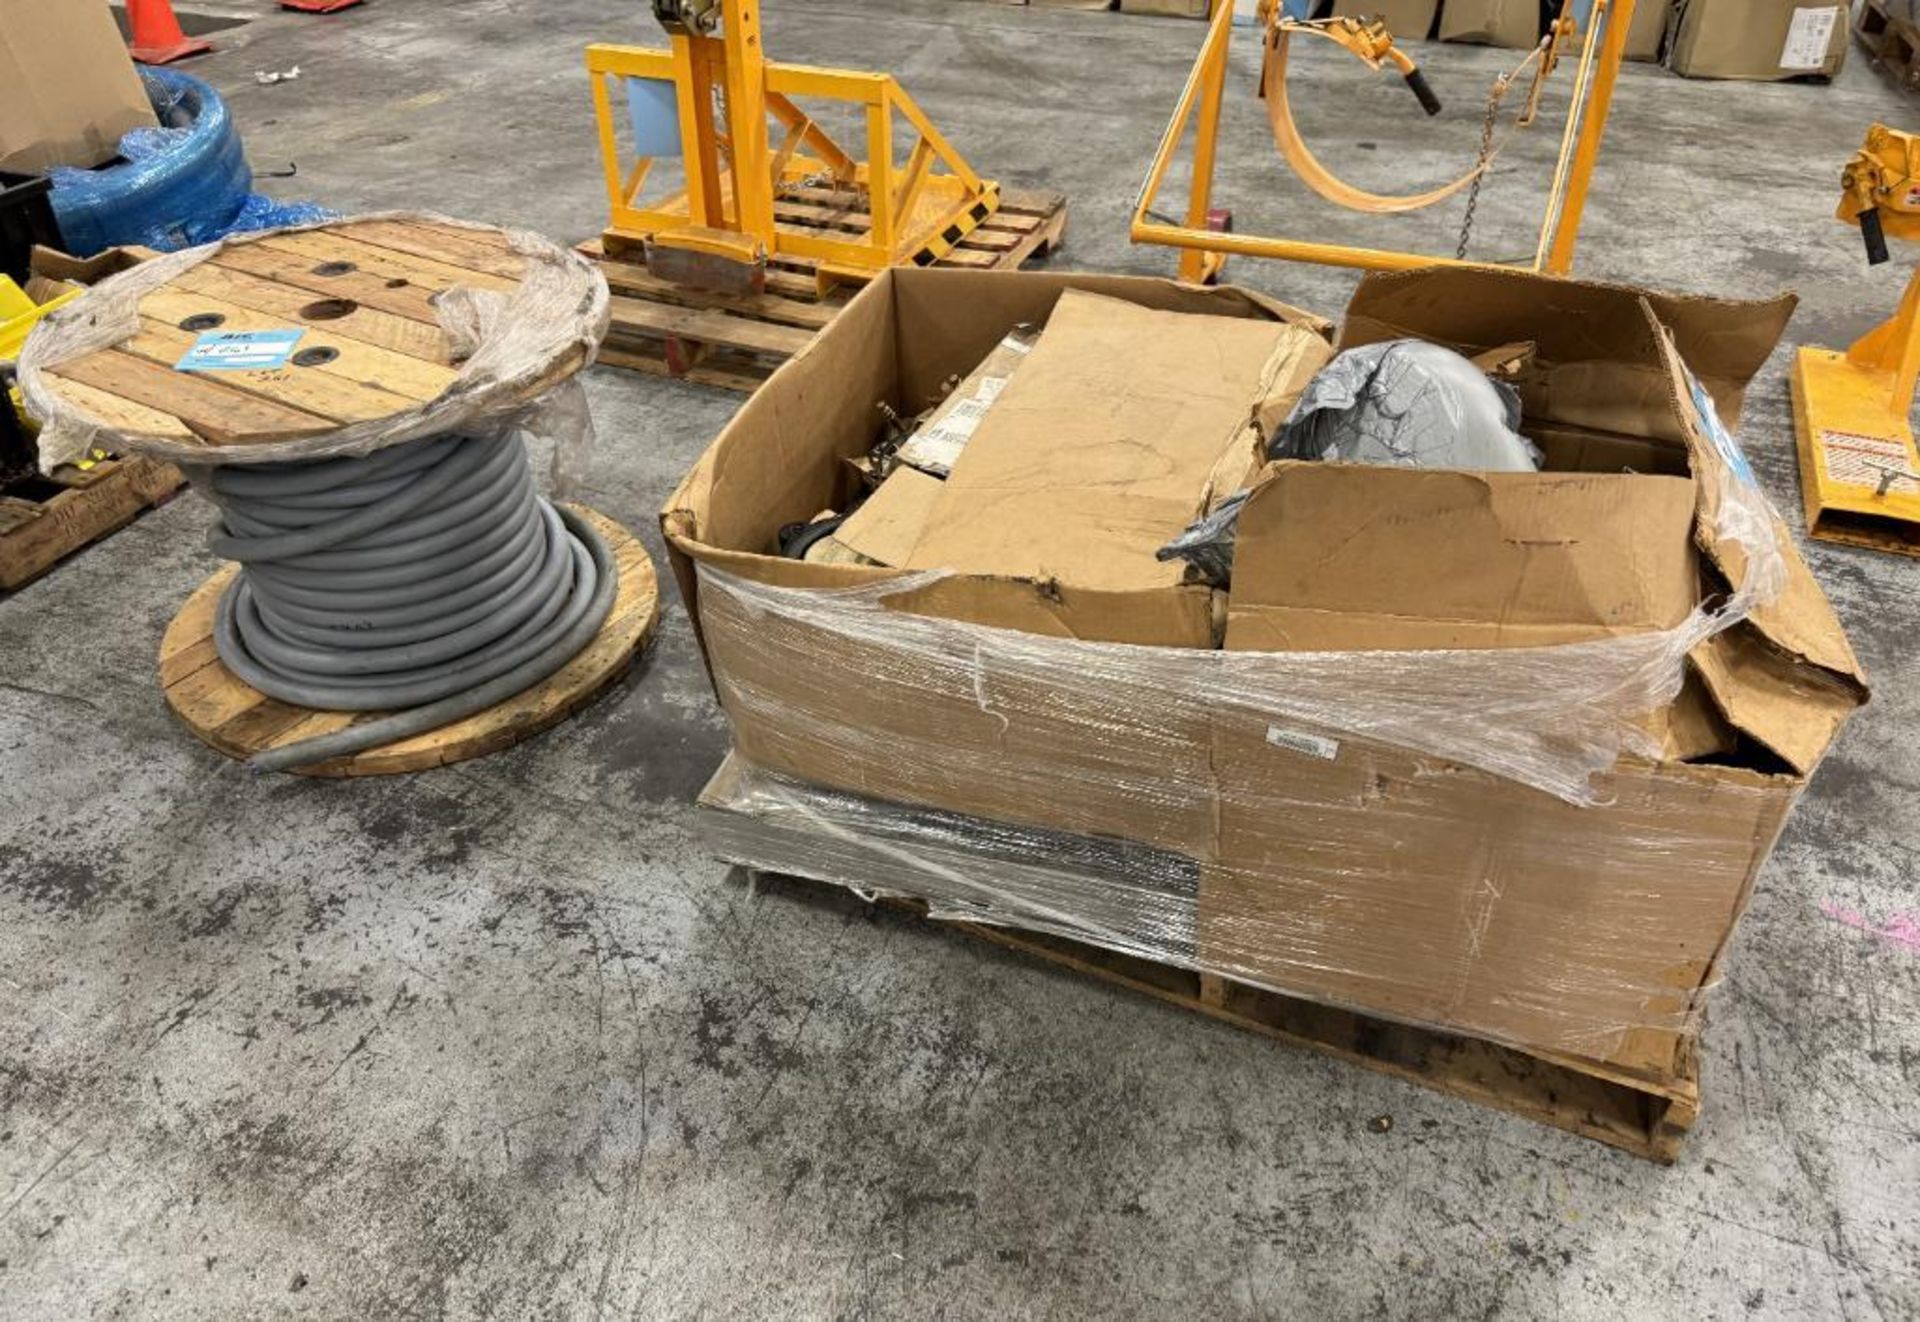 Lot Consisting Of: Spool of wire, pipe hangers, pipe fittings, hose, butterfly valves. - Image 2 of 15